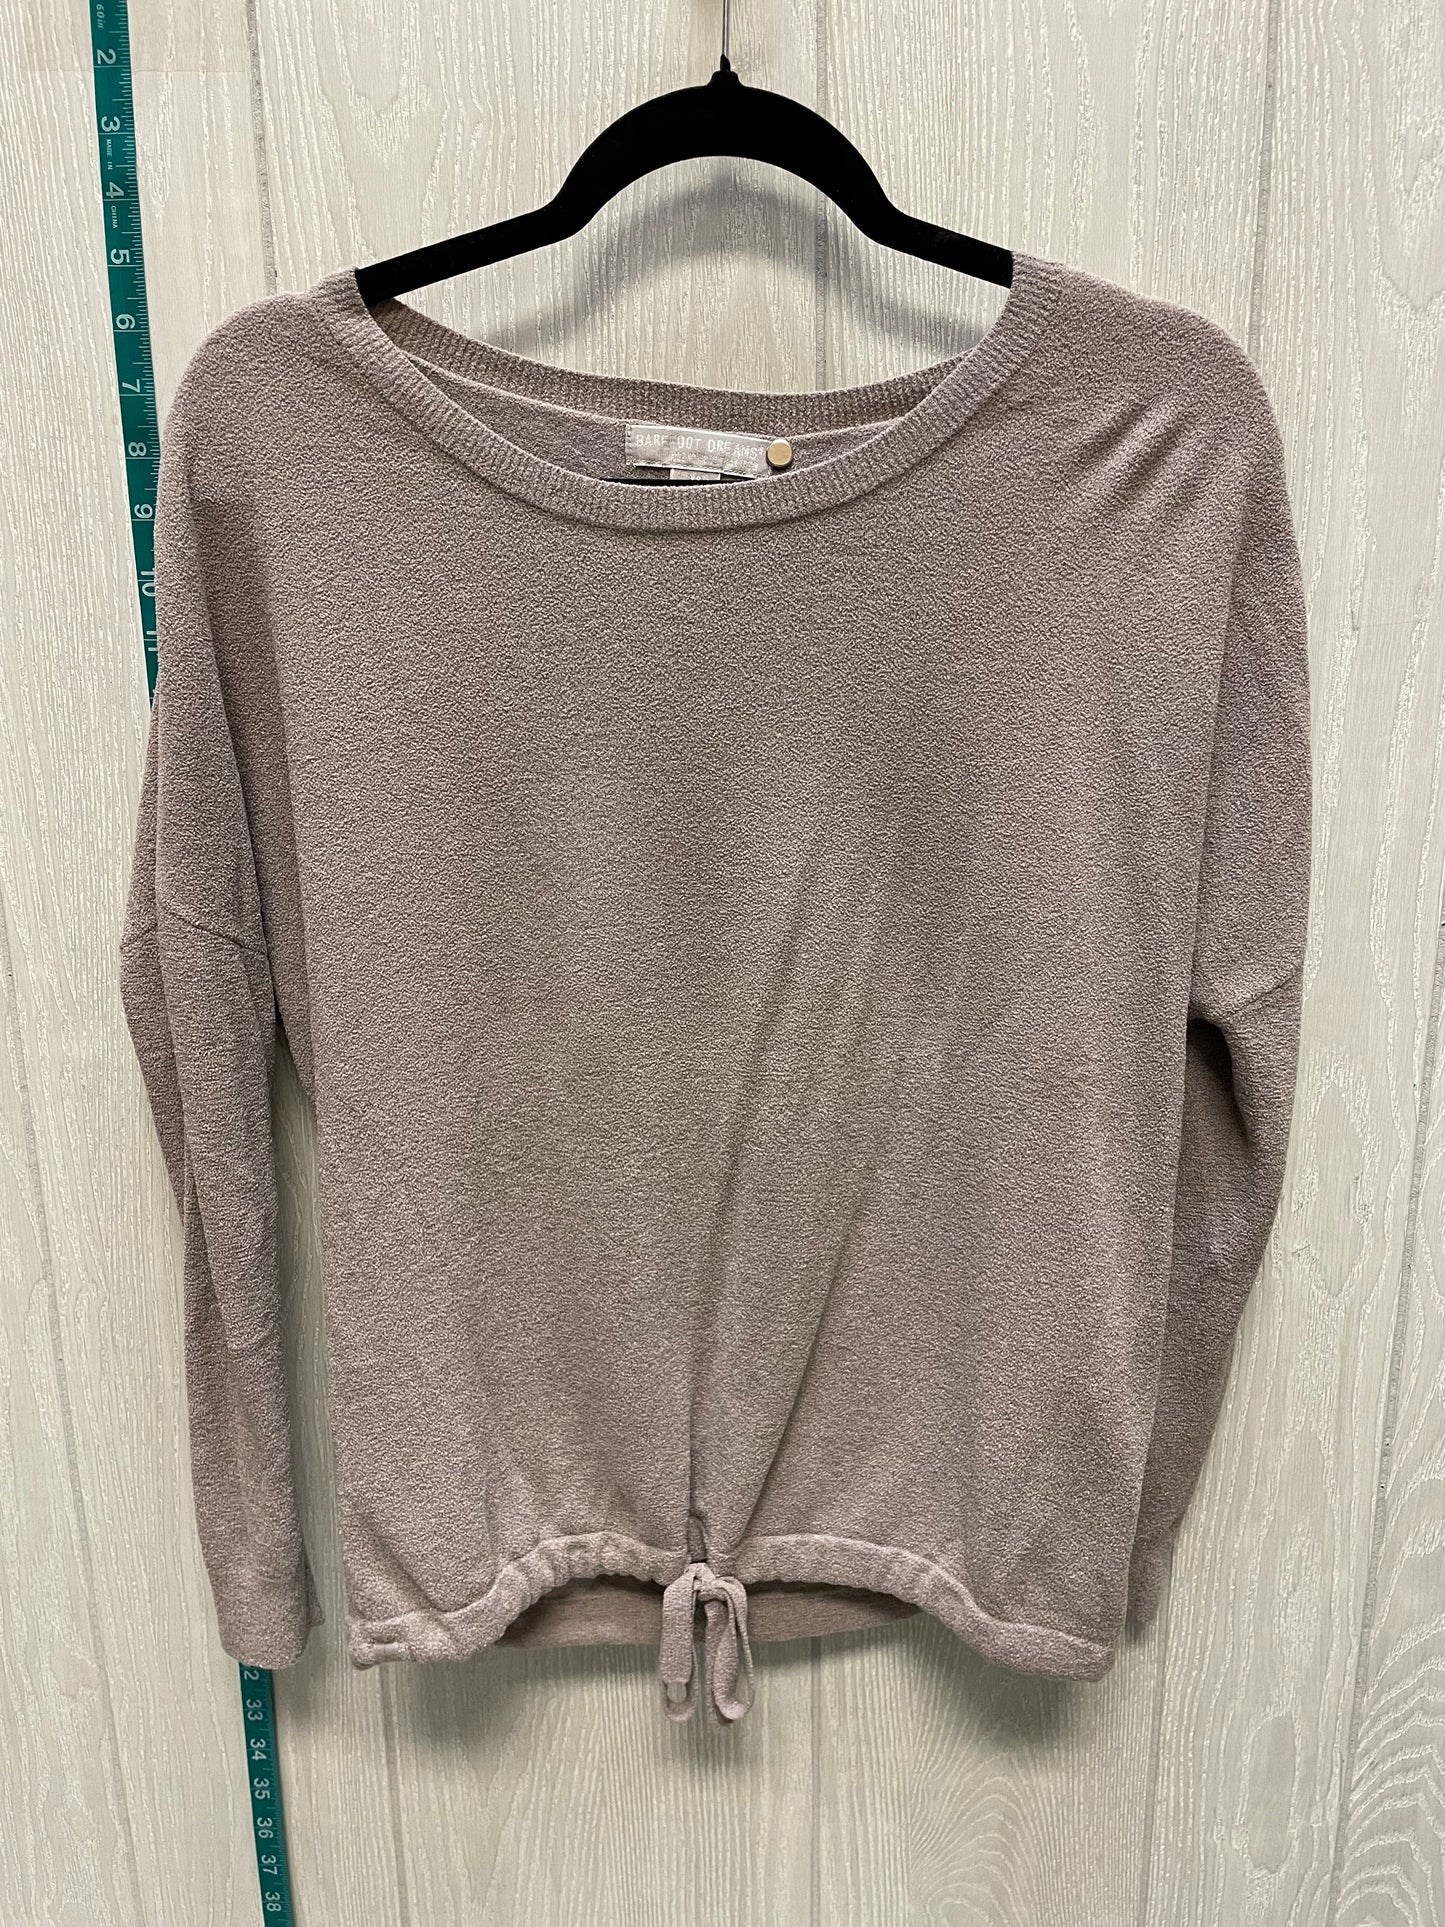 Taupe Top Long Sleeve Barefoot Dreams, Size Xs